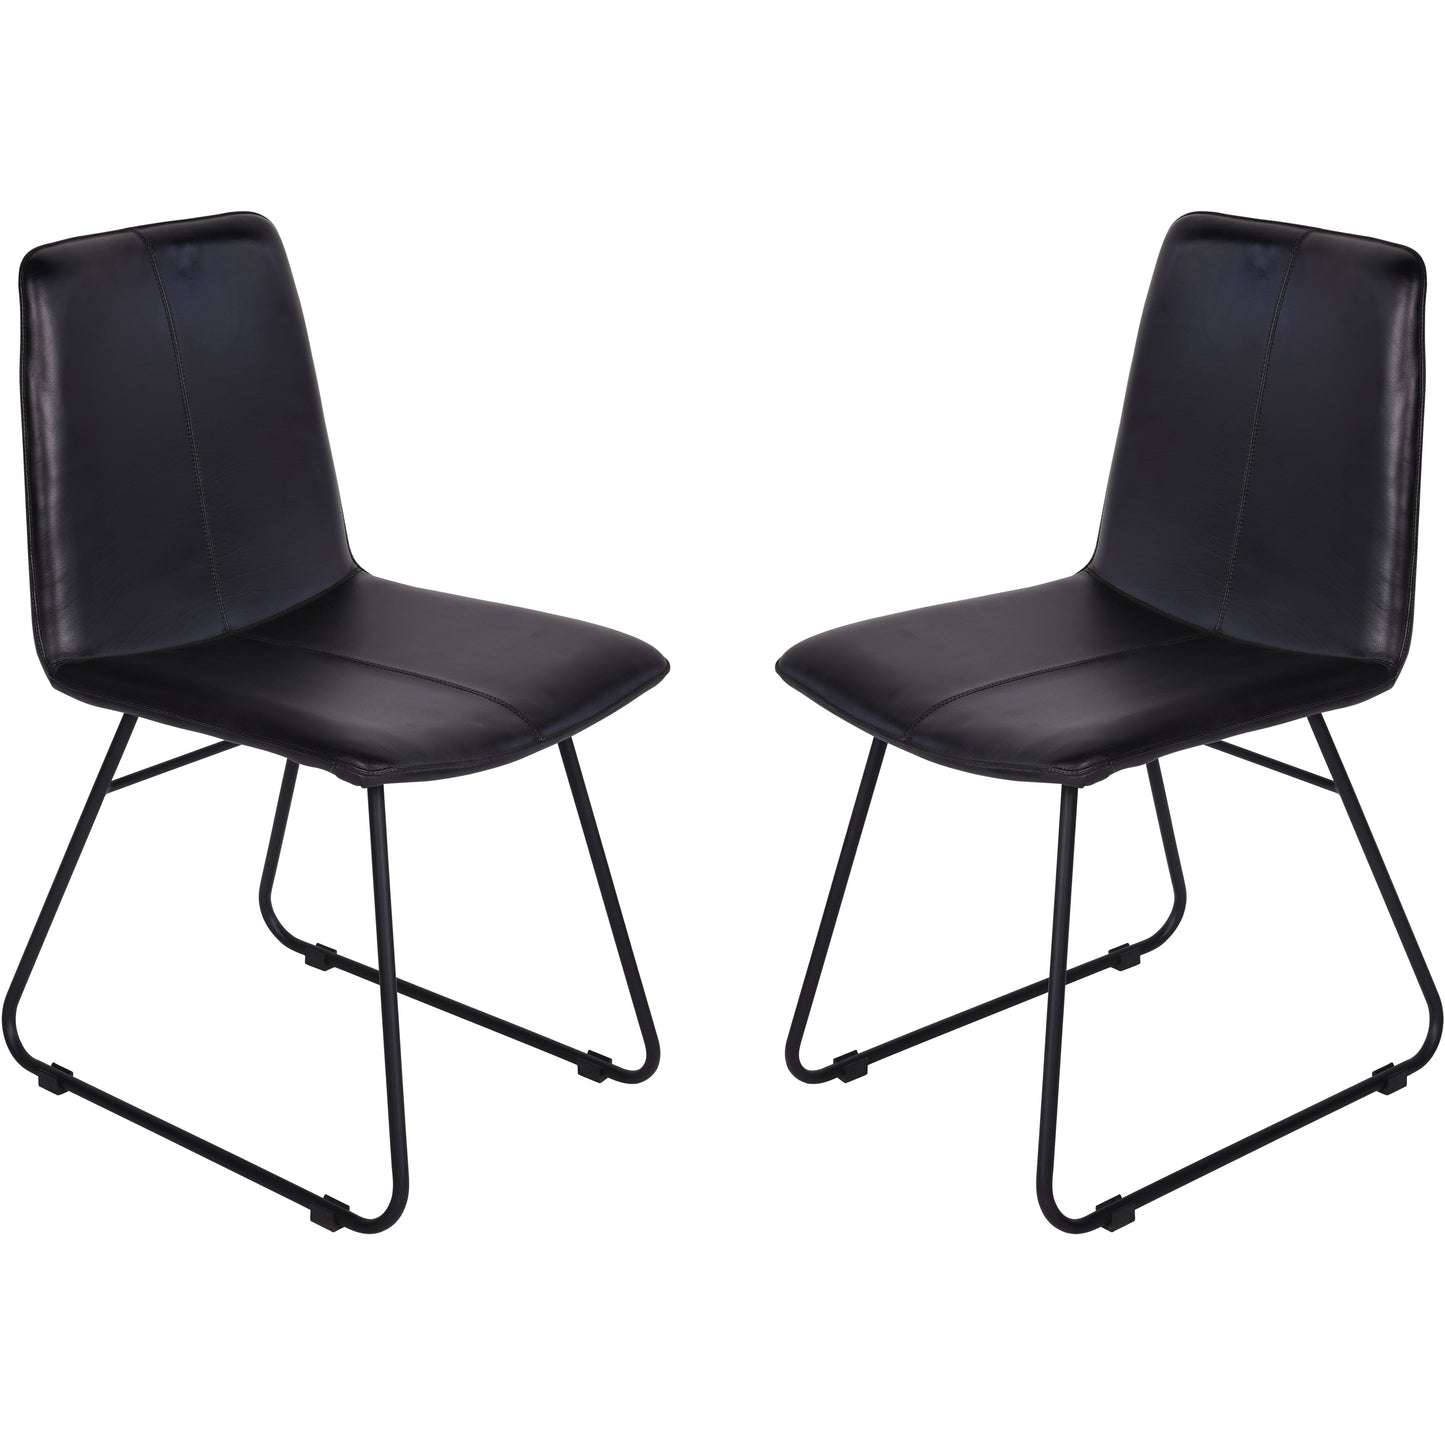 Slate Leather Dining Chairs (Set of 2) in Charcoal